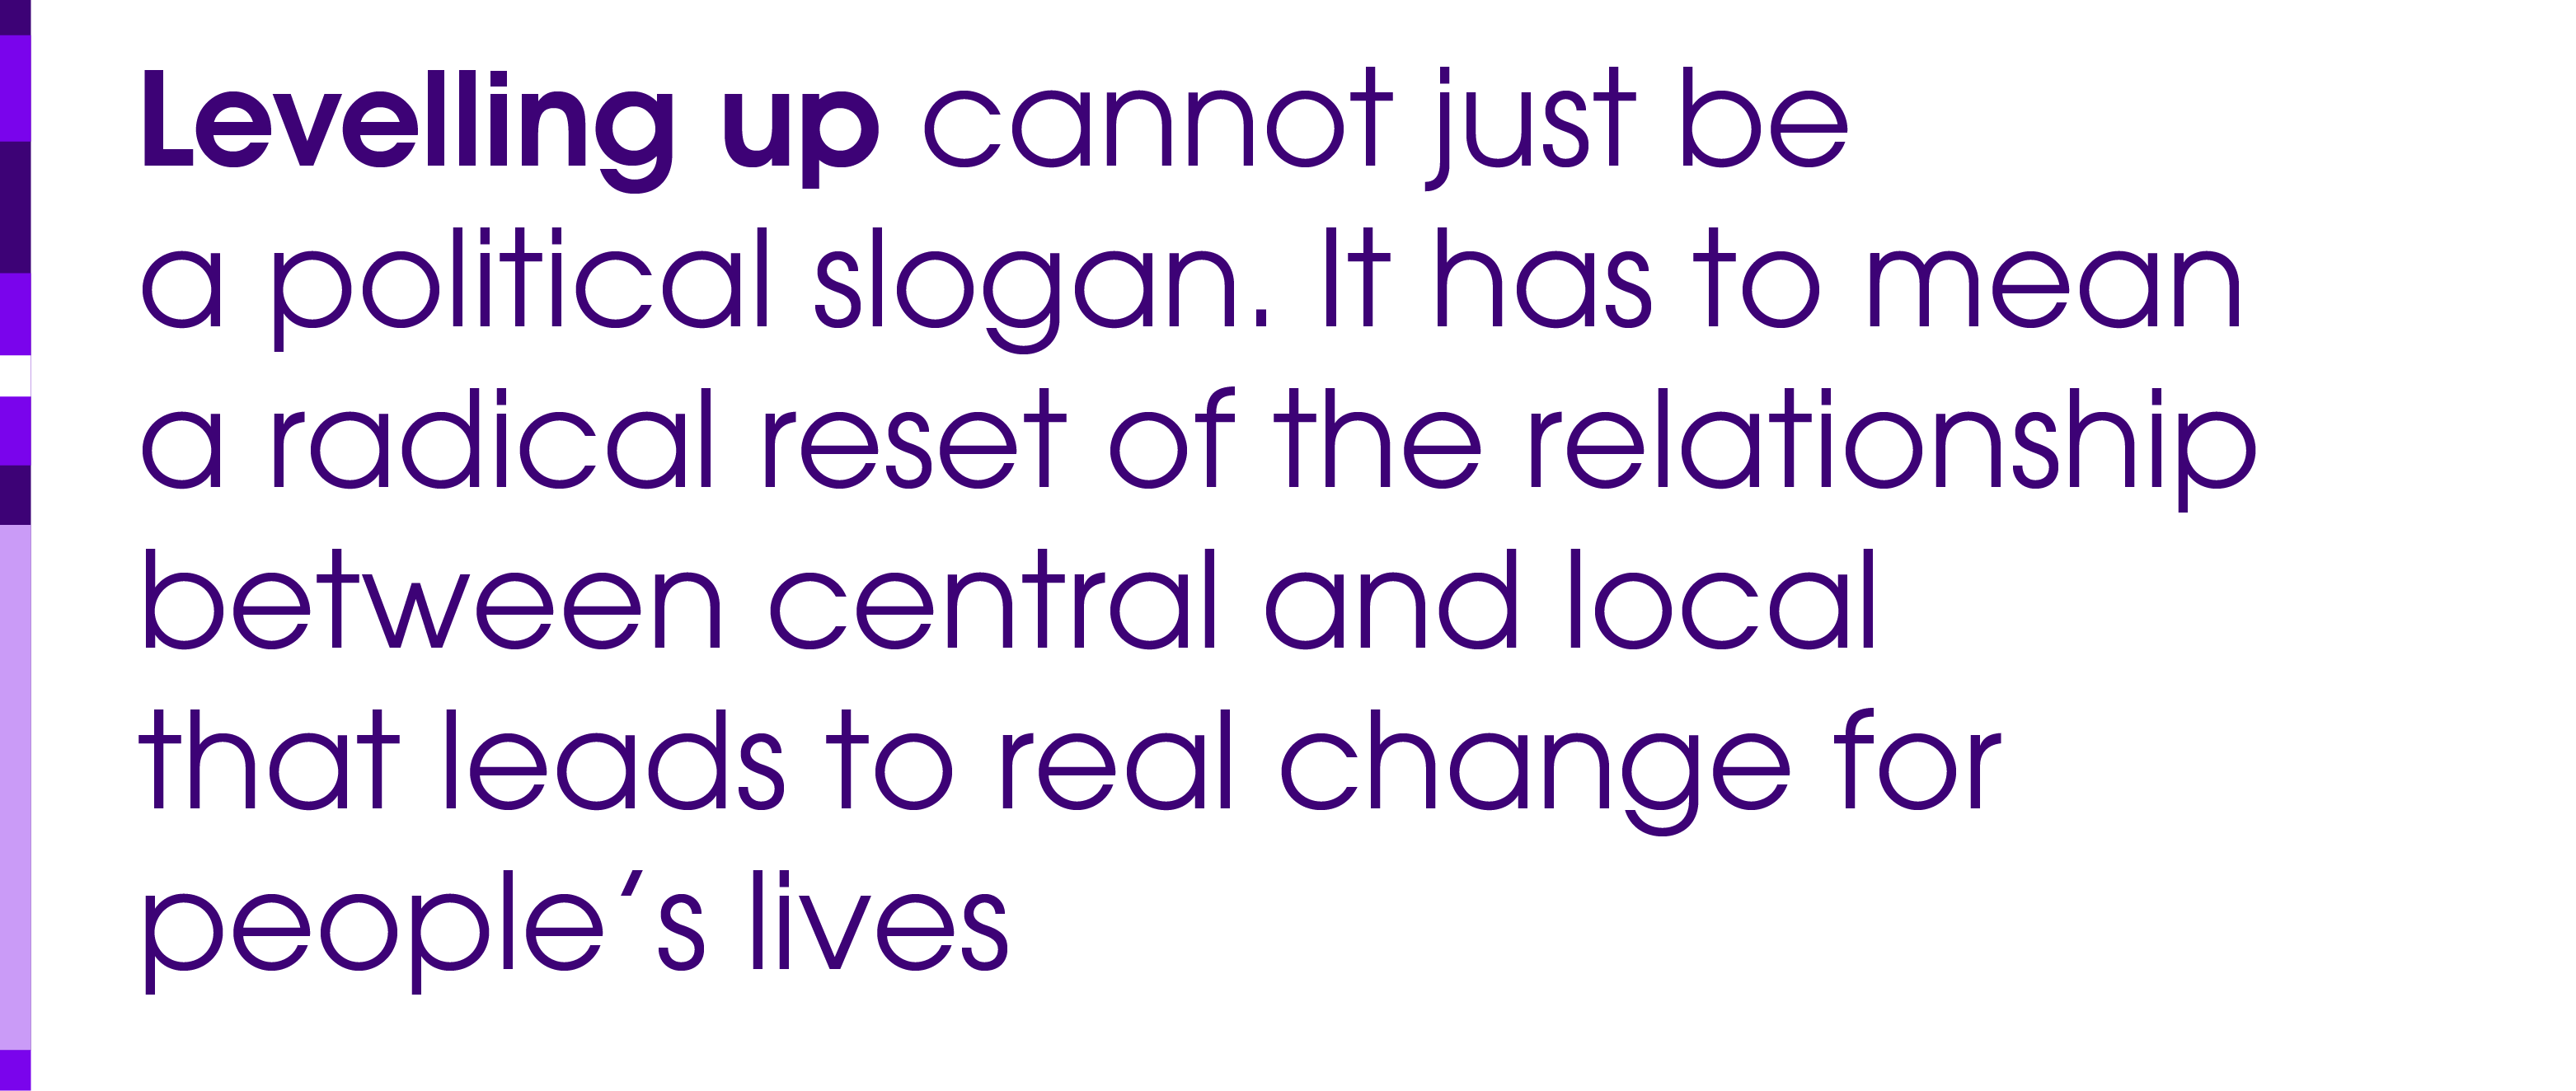 Levelling up cannot just be a political slogan. It has to mean a radical reset of the relationship between central and local that leads to real change for people’s lives.